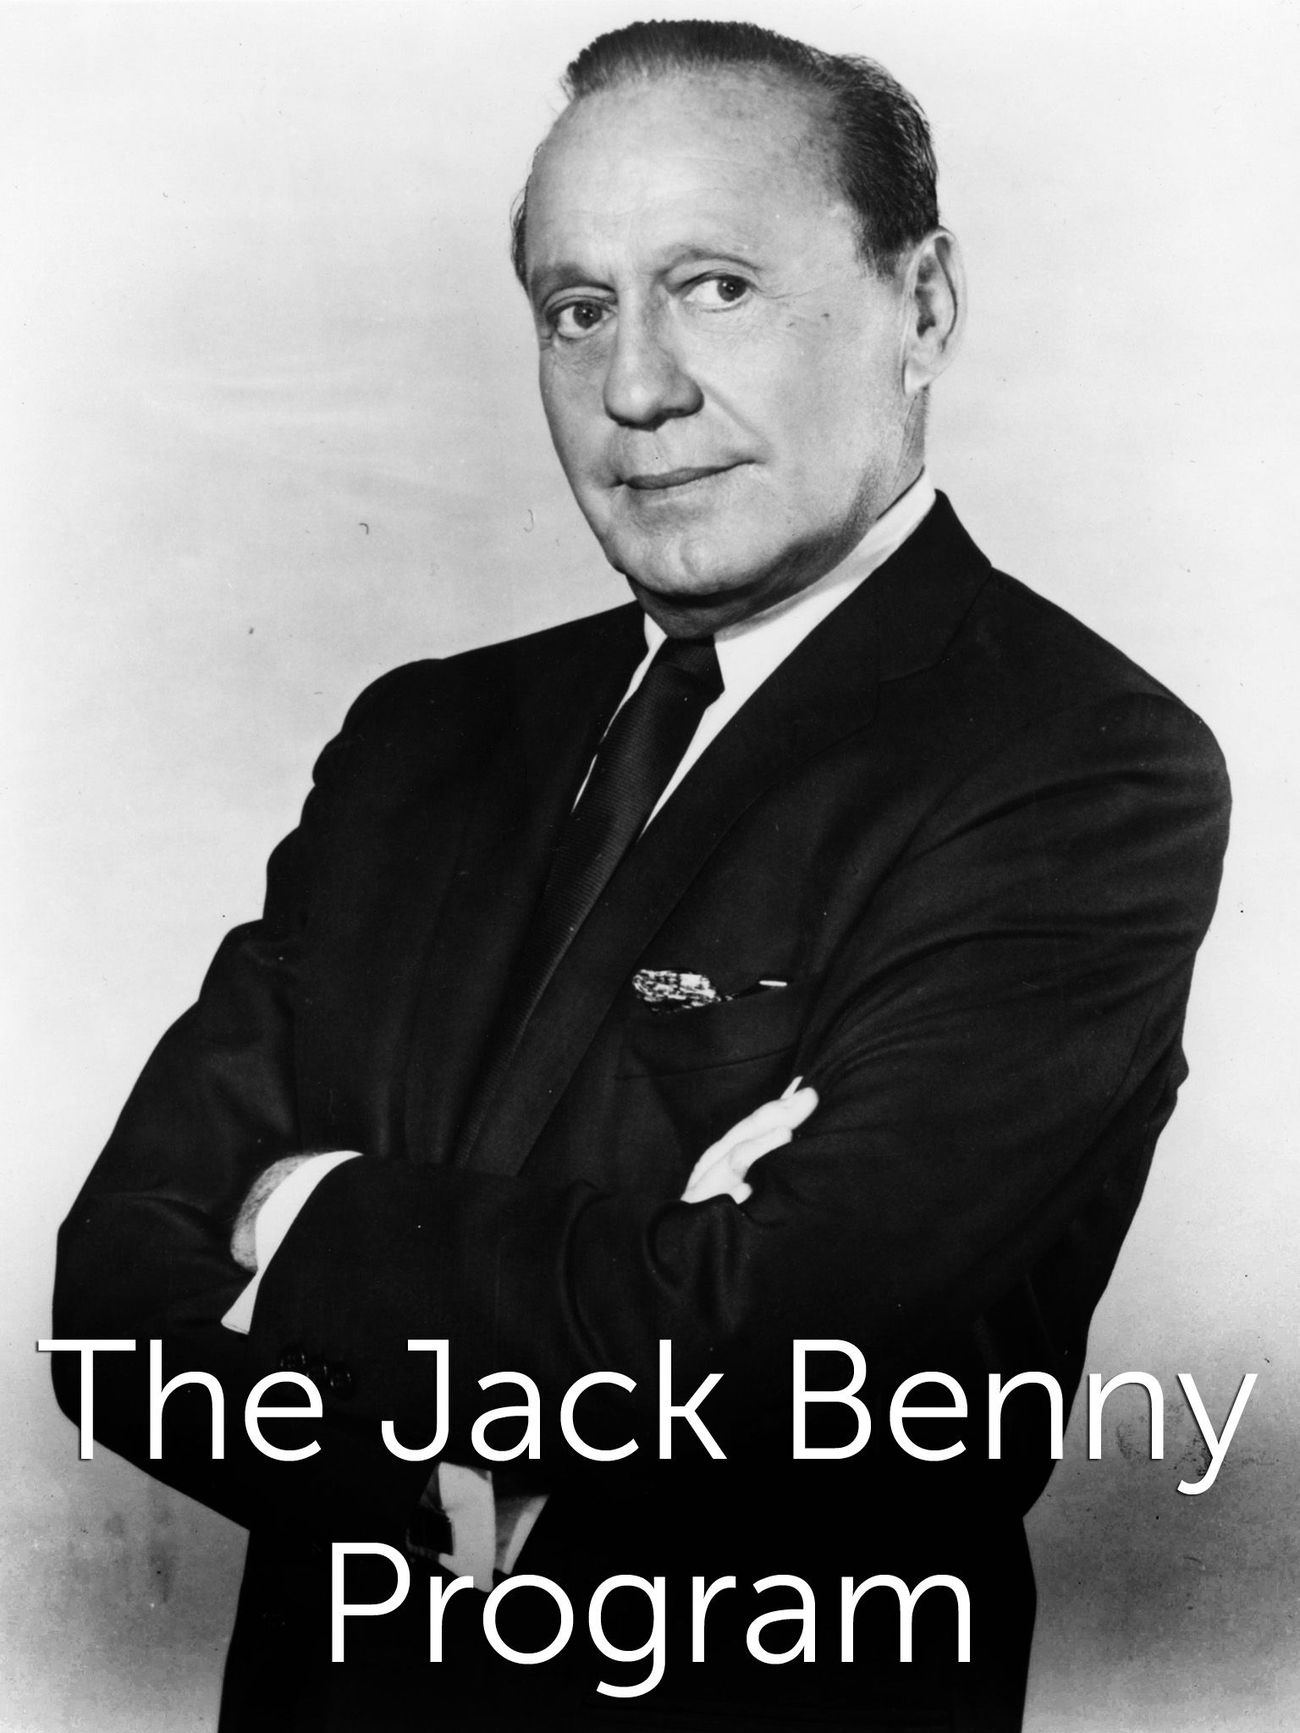 The Jack Benny Program TV Show: News, Videos, Full Episodes and More ...